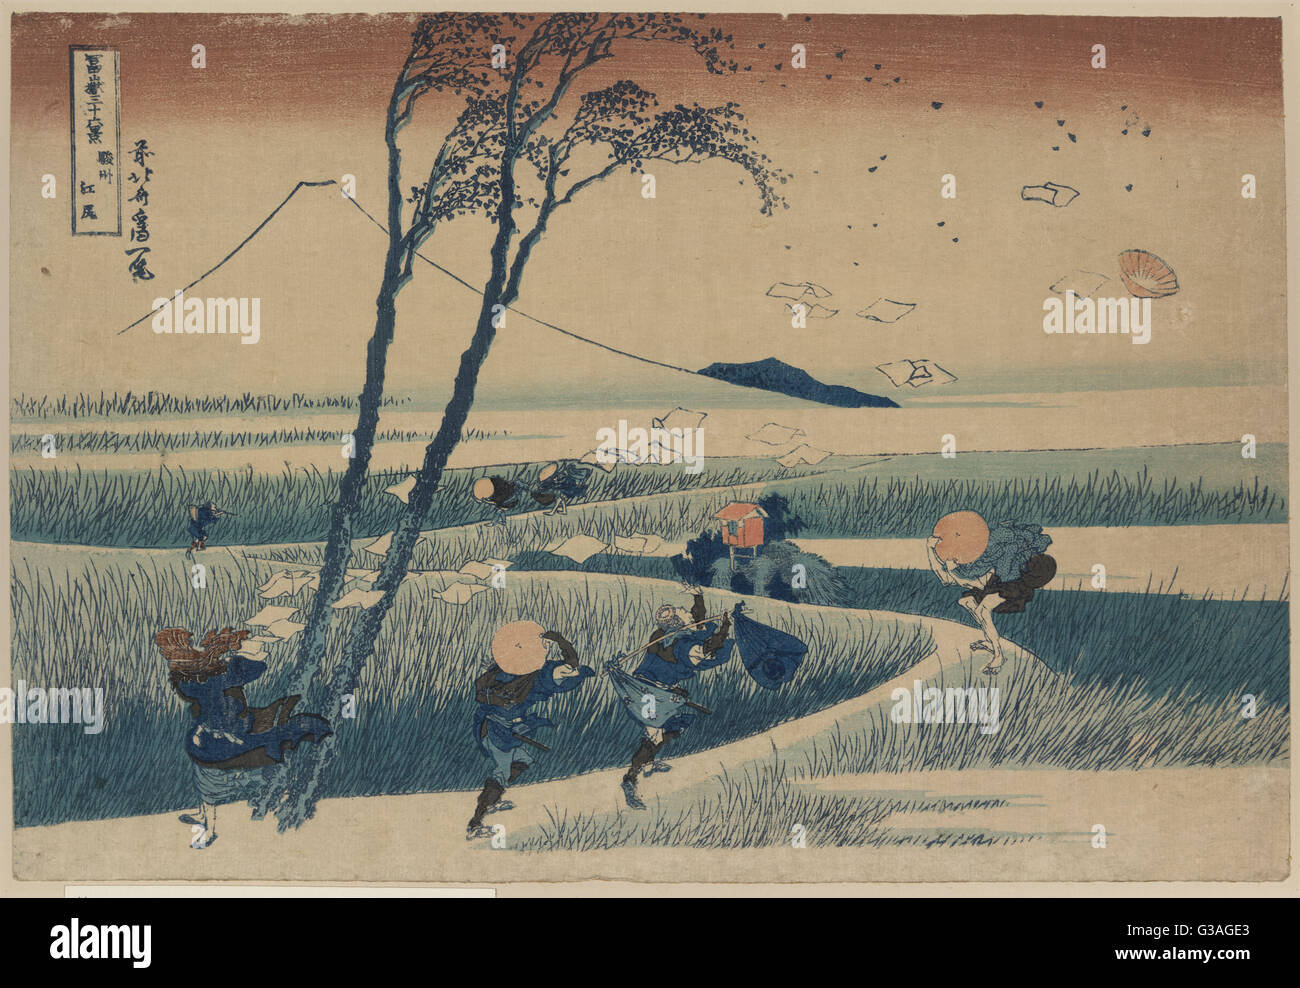 Sunshu ejiri. Print shows several wayfarers struggling against a strong wind that is blowing away hats and papers; Mount Fuji in the background. Date 1832 or 1833. Stock Photo